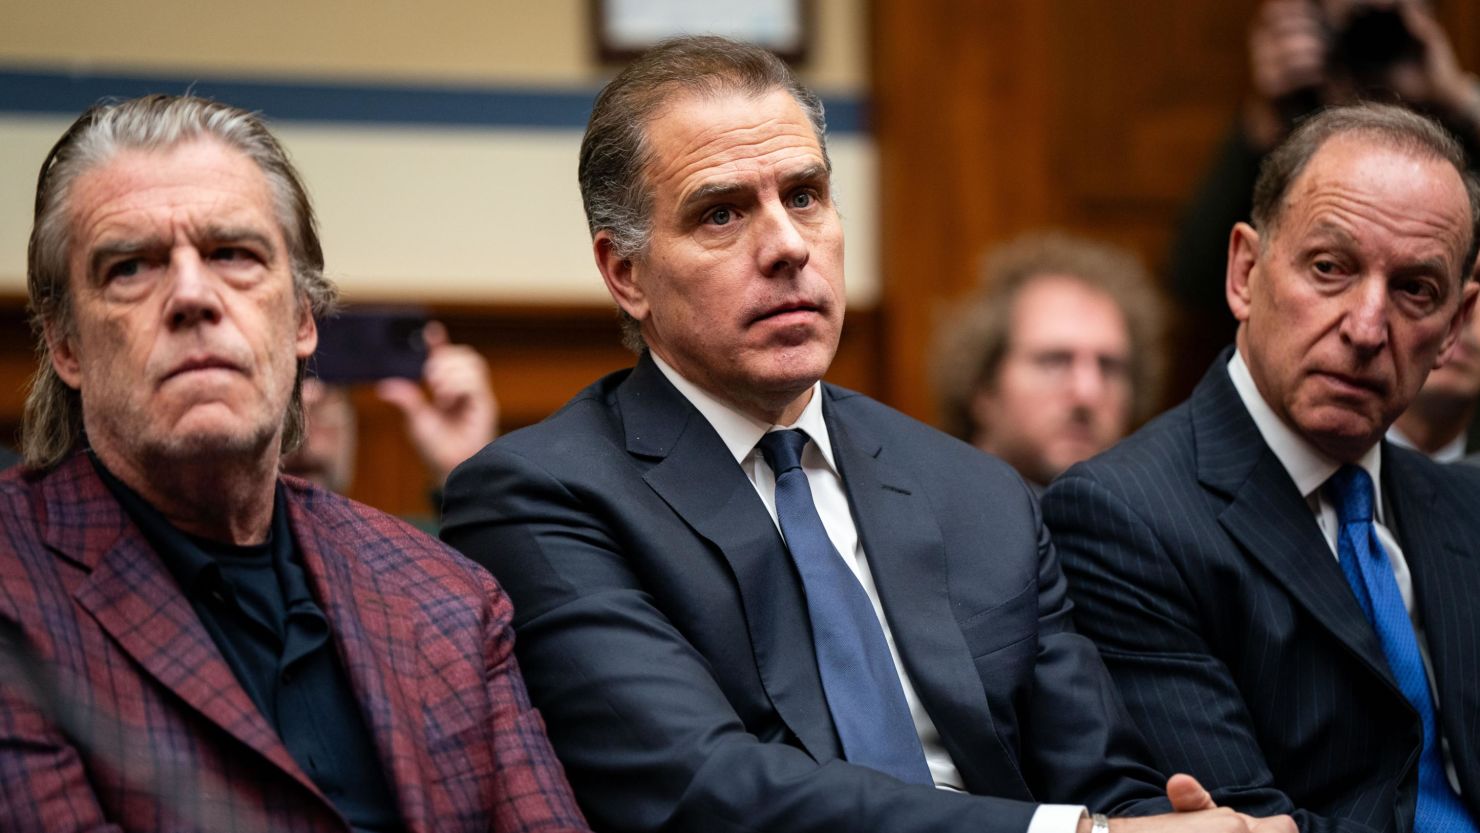 Hunter Biden, son of U.S. President Joe Biden, flanked by Kevin Morris, left, and Abbe Lowell, right, attend a House Oversight Committee meeting on January 10, 2024 in Washington, DC. The committee is meeting today as it considers citing him for Contempt of Congress.